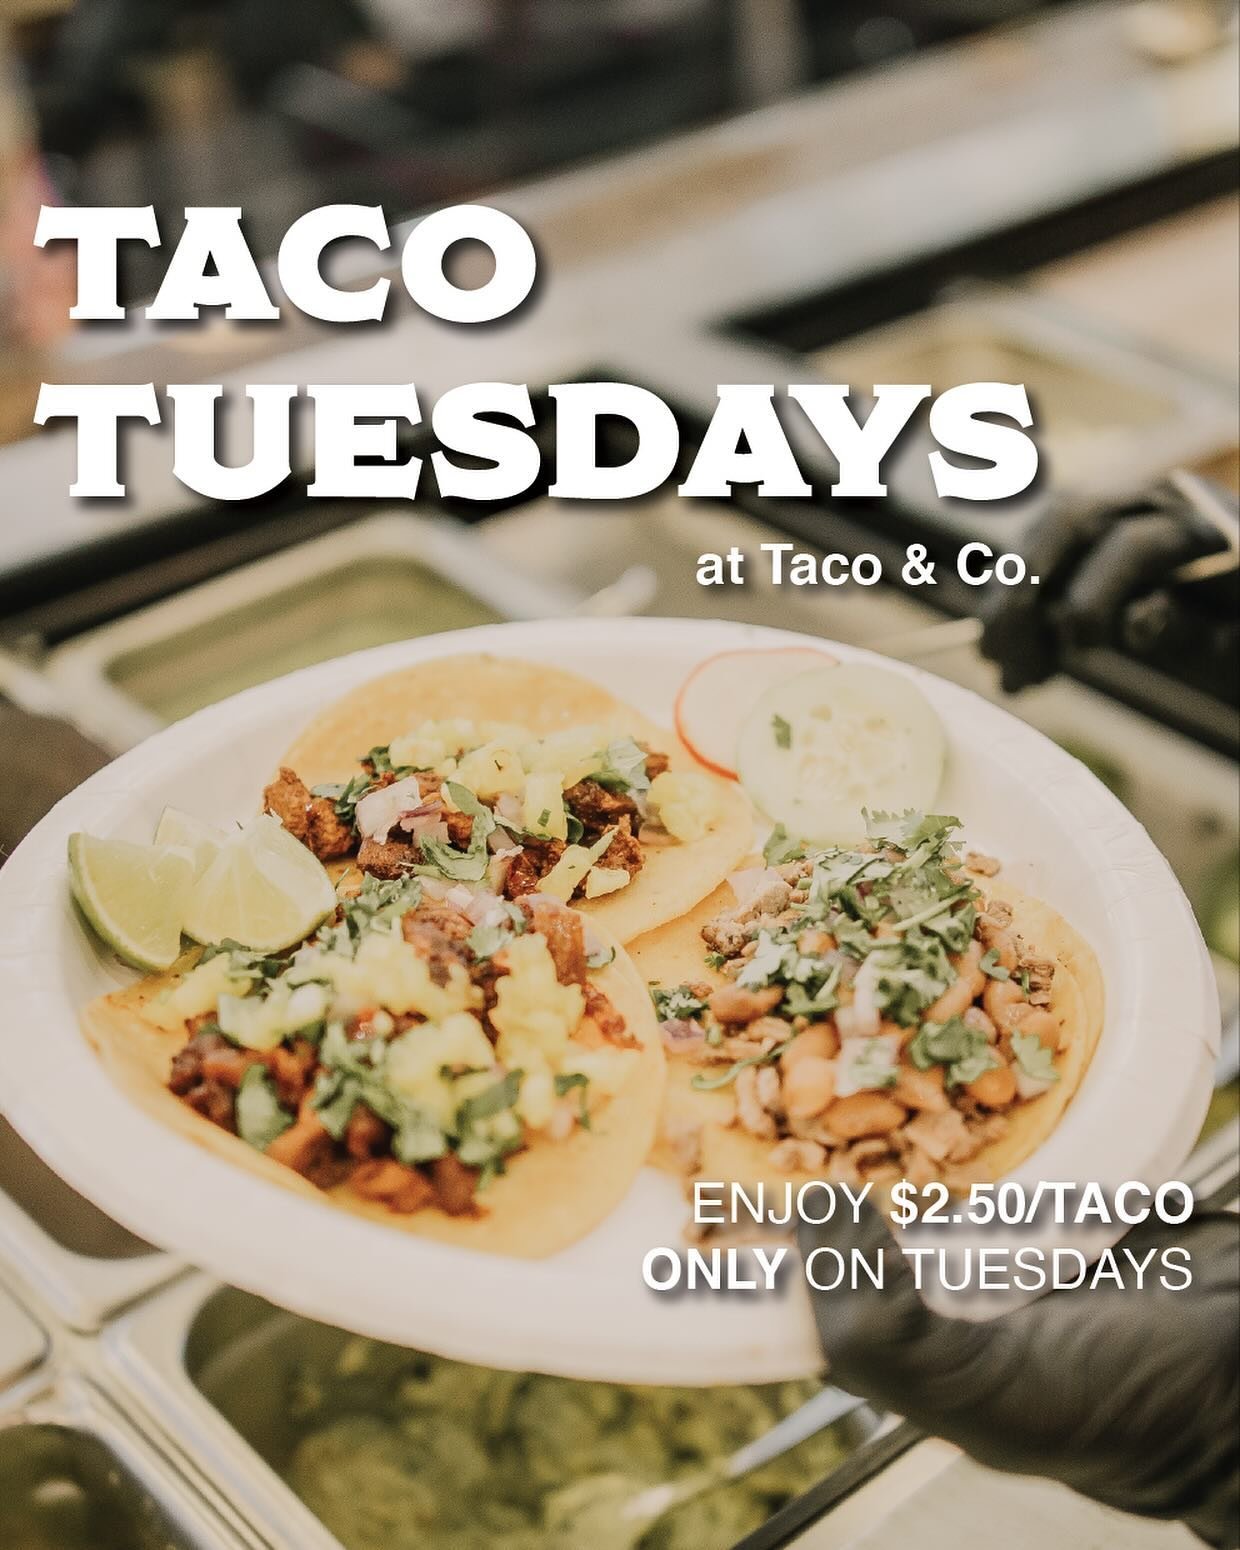 Here&rsquo;s your reminder, that it&rsquo;s TACO TUESDAY! 🌮

Every Tuesday here at Taco &amp; Co, tacos are $2.50 each!

Share this with someone you want to get tacos with!

We can&rsquo;t wait to serve you and your family and friends!